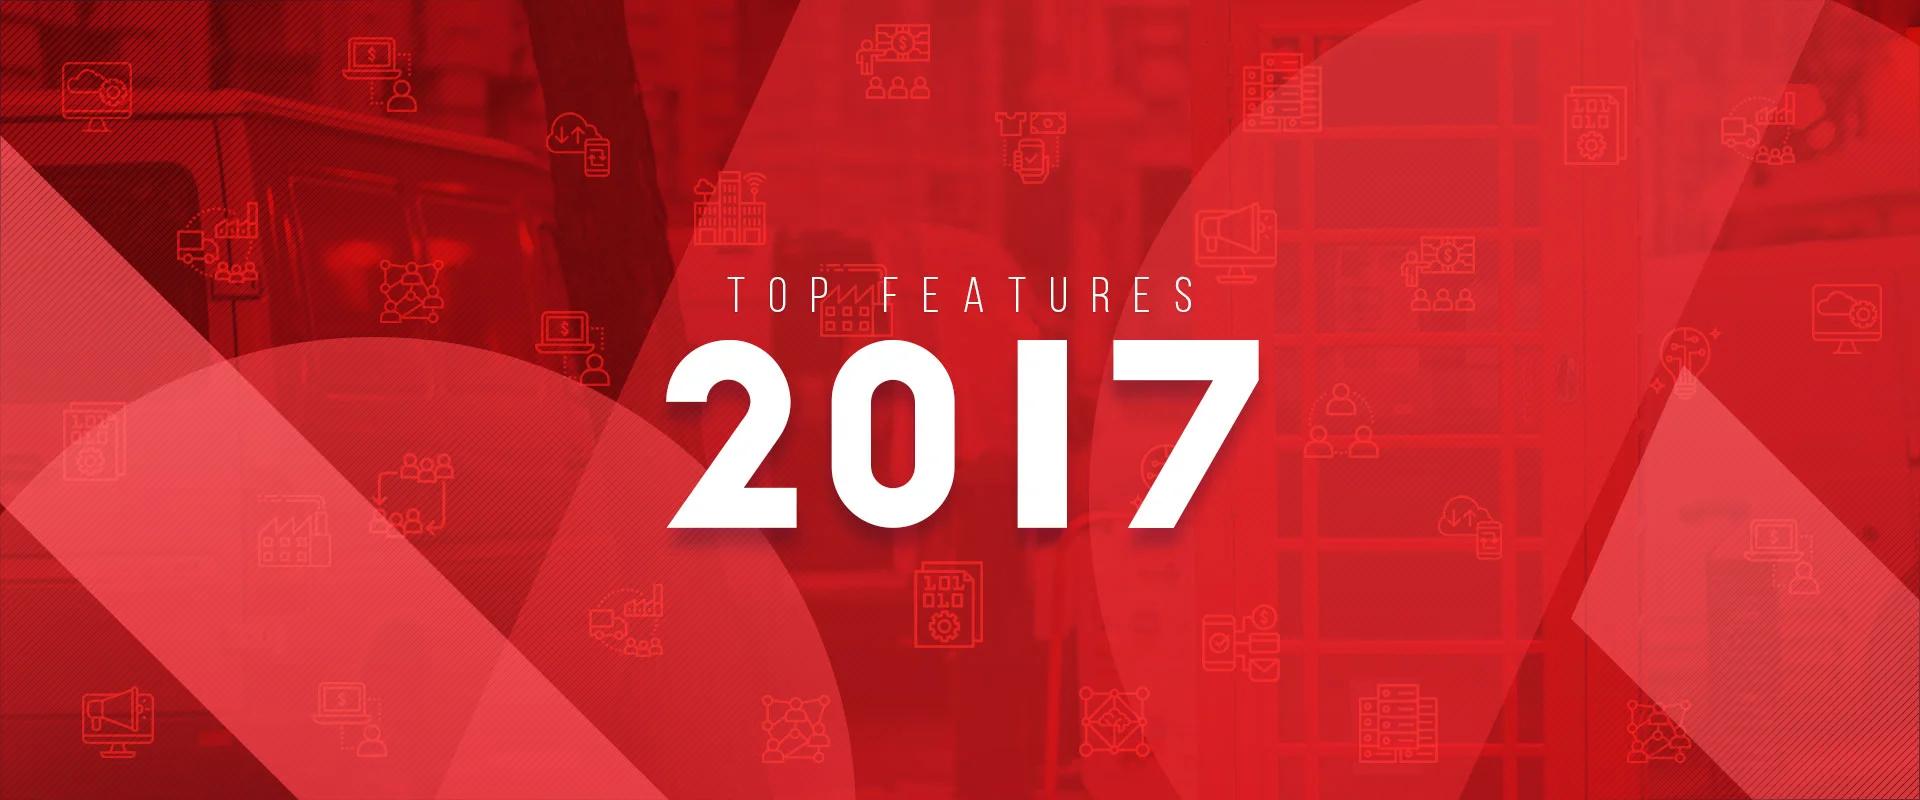 Check out the Top Features for the Year 2018